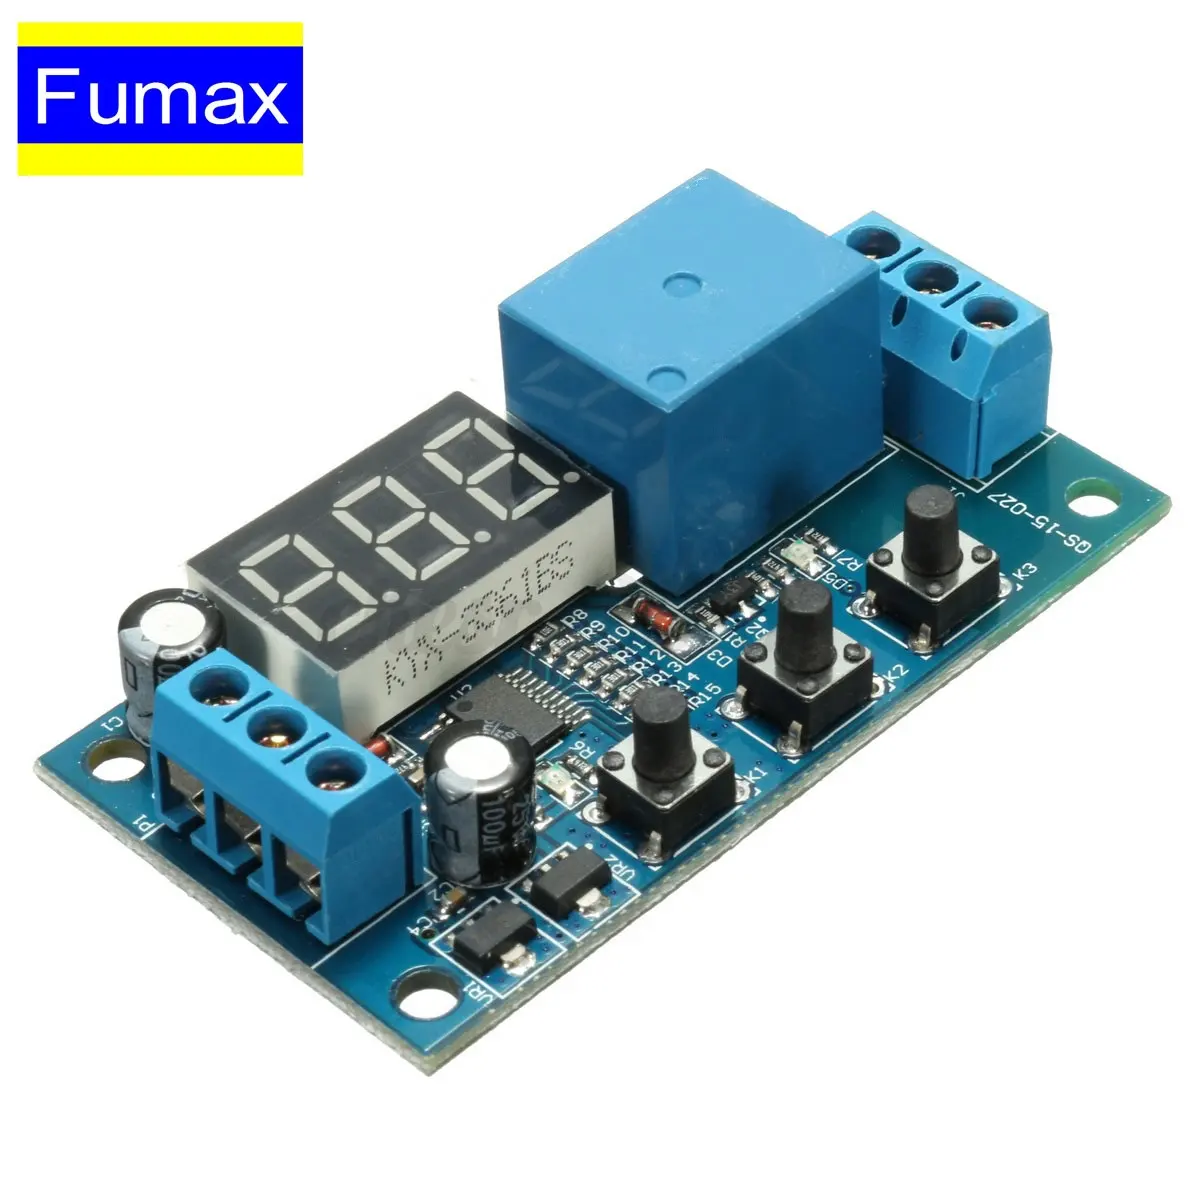 Shenzhen OEM PCB Assembly Timer Relay Module Printed Circuit Board Turnkey Servvice 1 Stop Solution